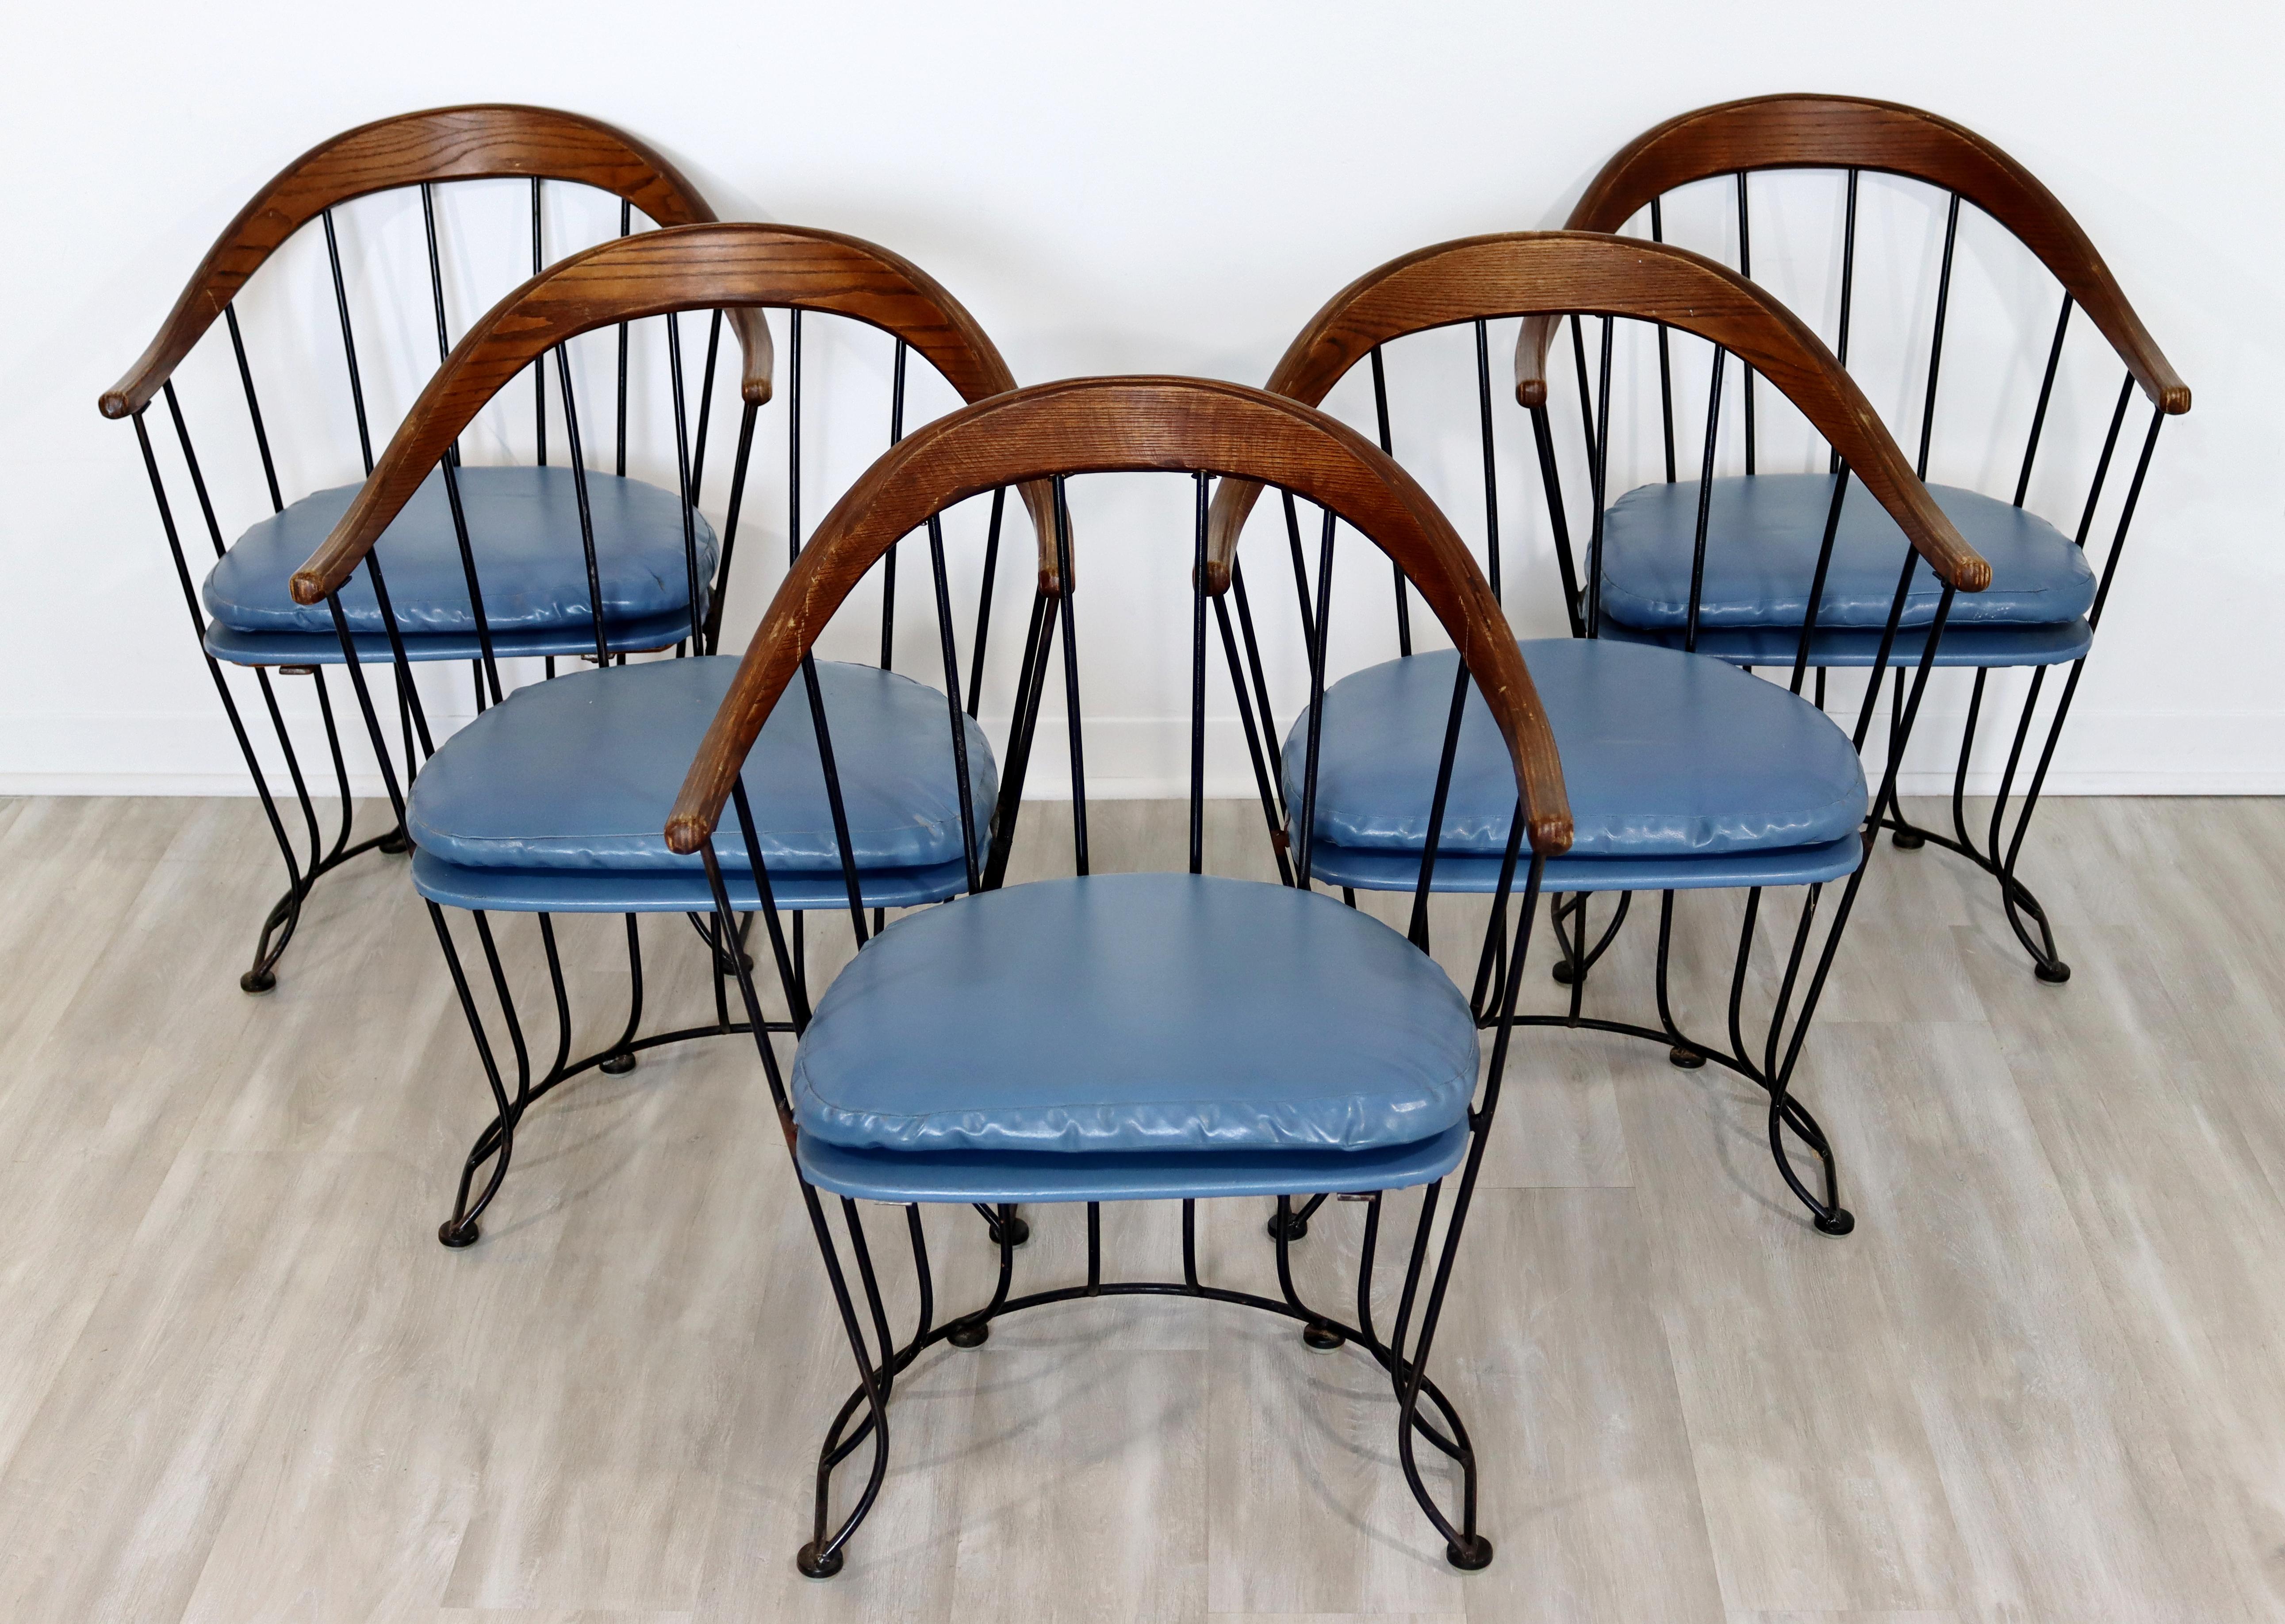 For your consideration is a brilliant, indoor/outdoor patio set of five, curved, wood topped armchairs, by Russell Woodard, circa the 1960s. In good vintage condition. The dimensions are 24